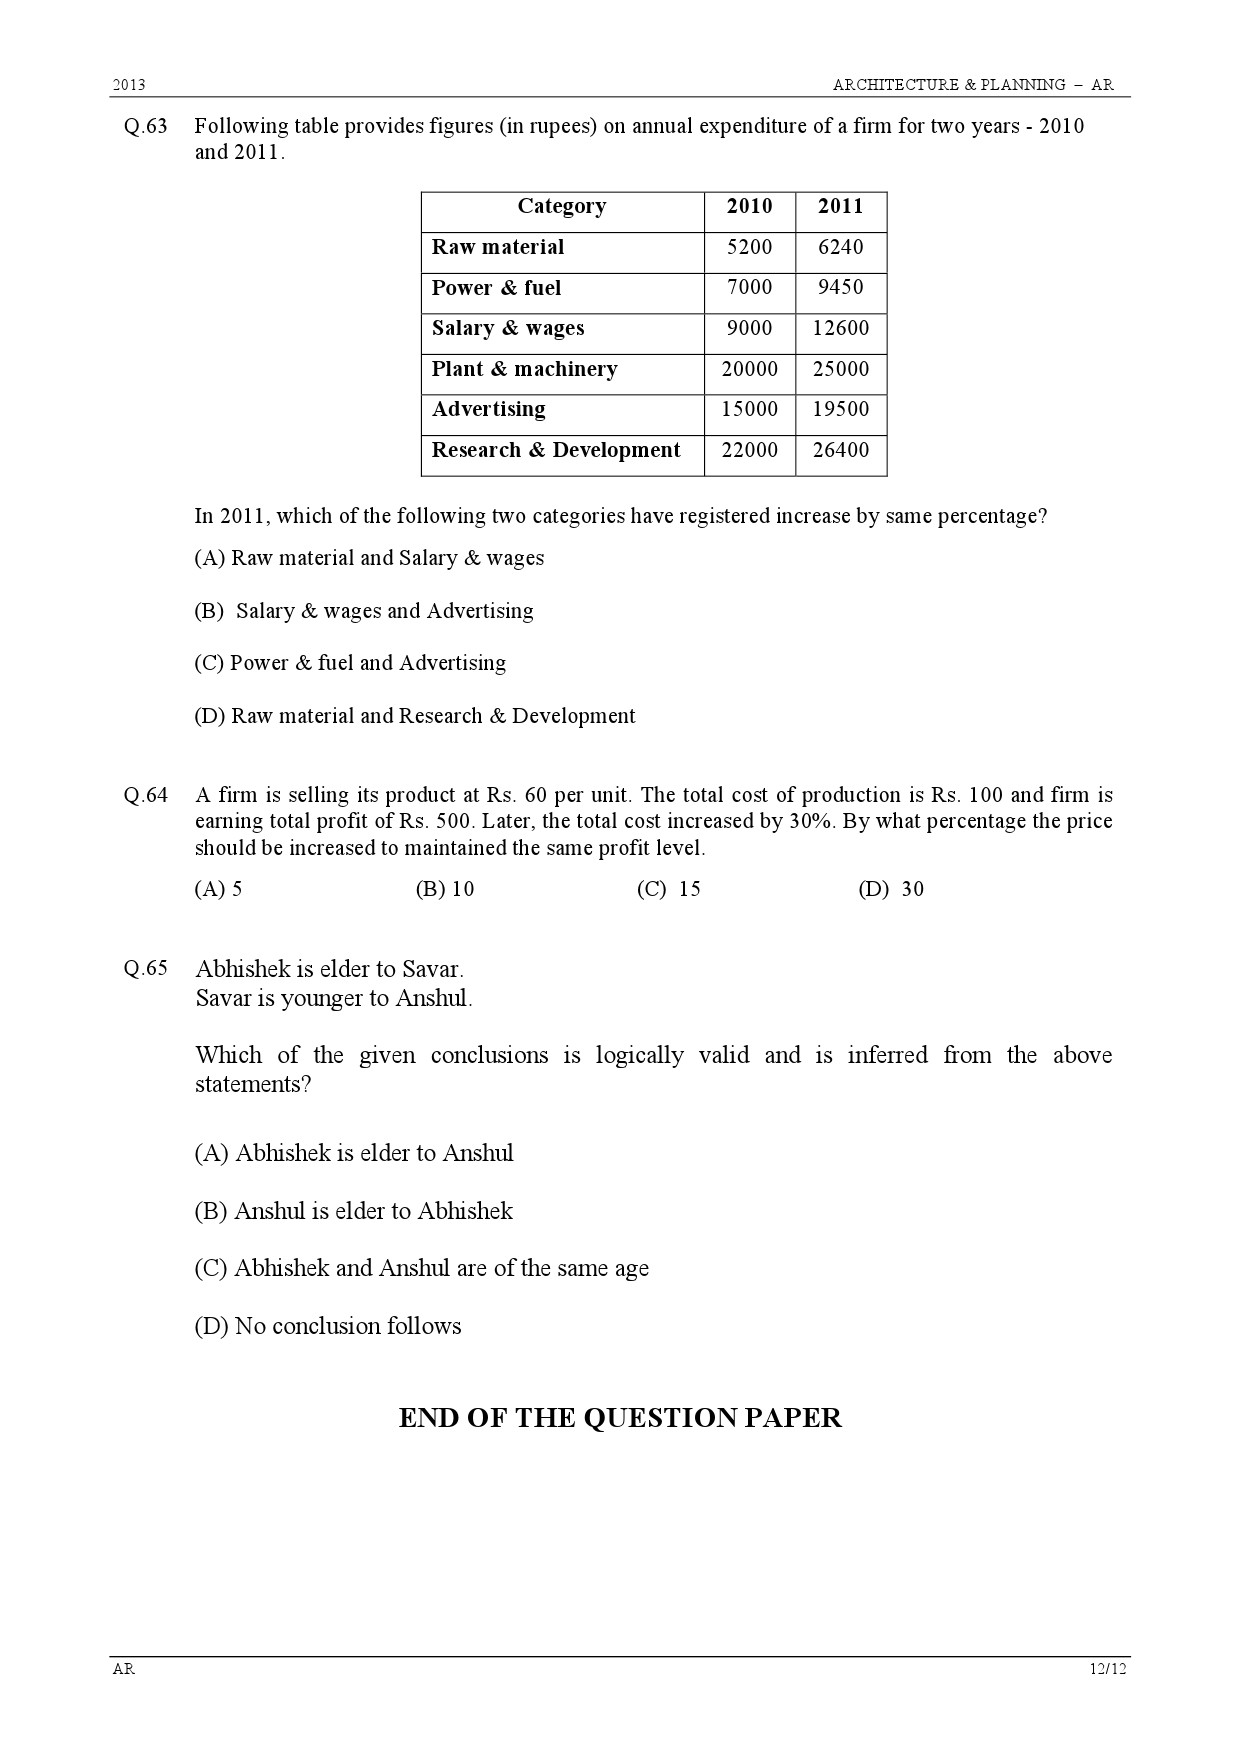 GATE Exam Question Paper 2013 Architecture and Planning 12